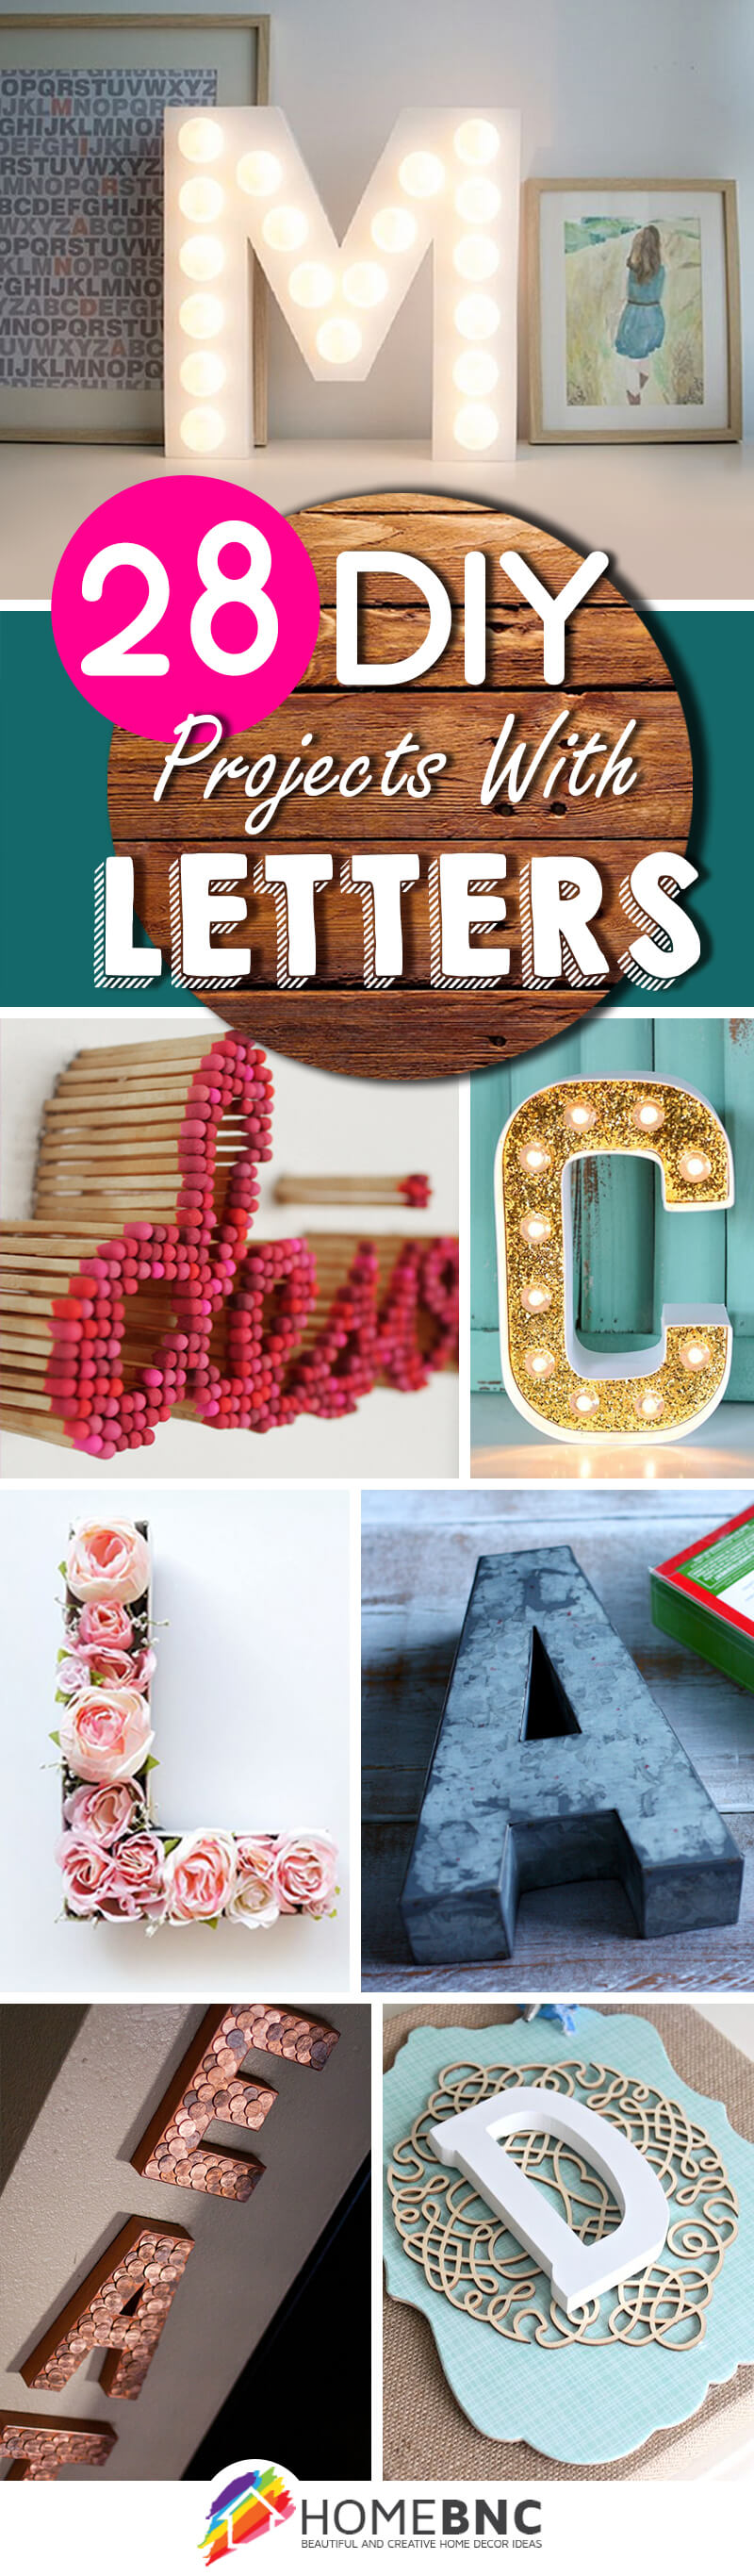 28 Best Diy Projects With Letters Ideas And Designs For 2020